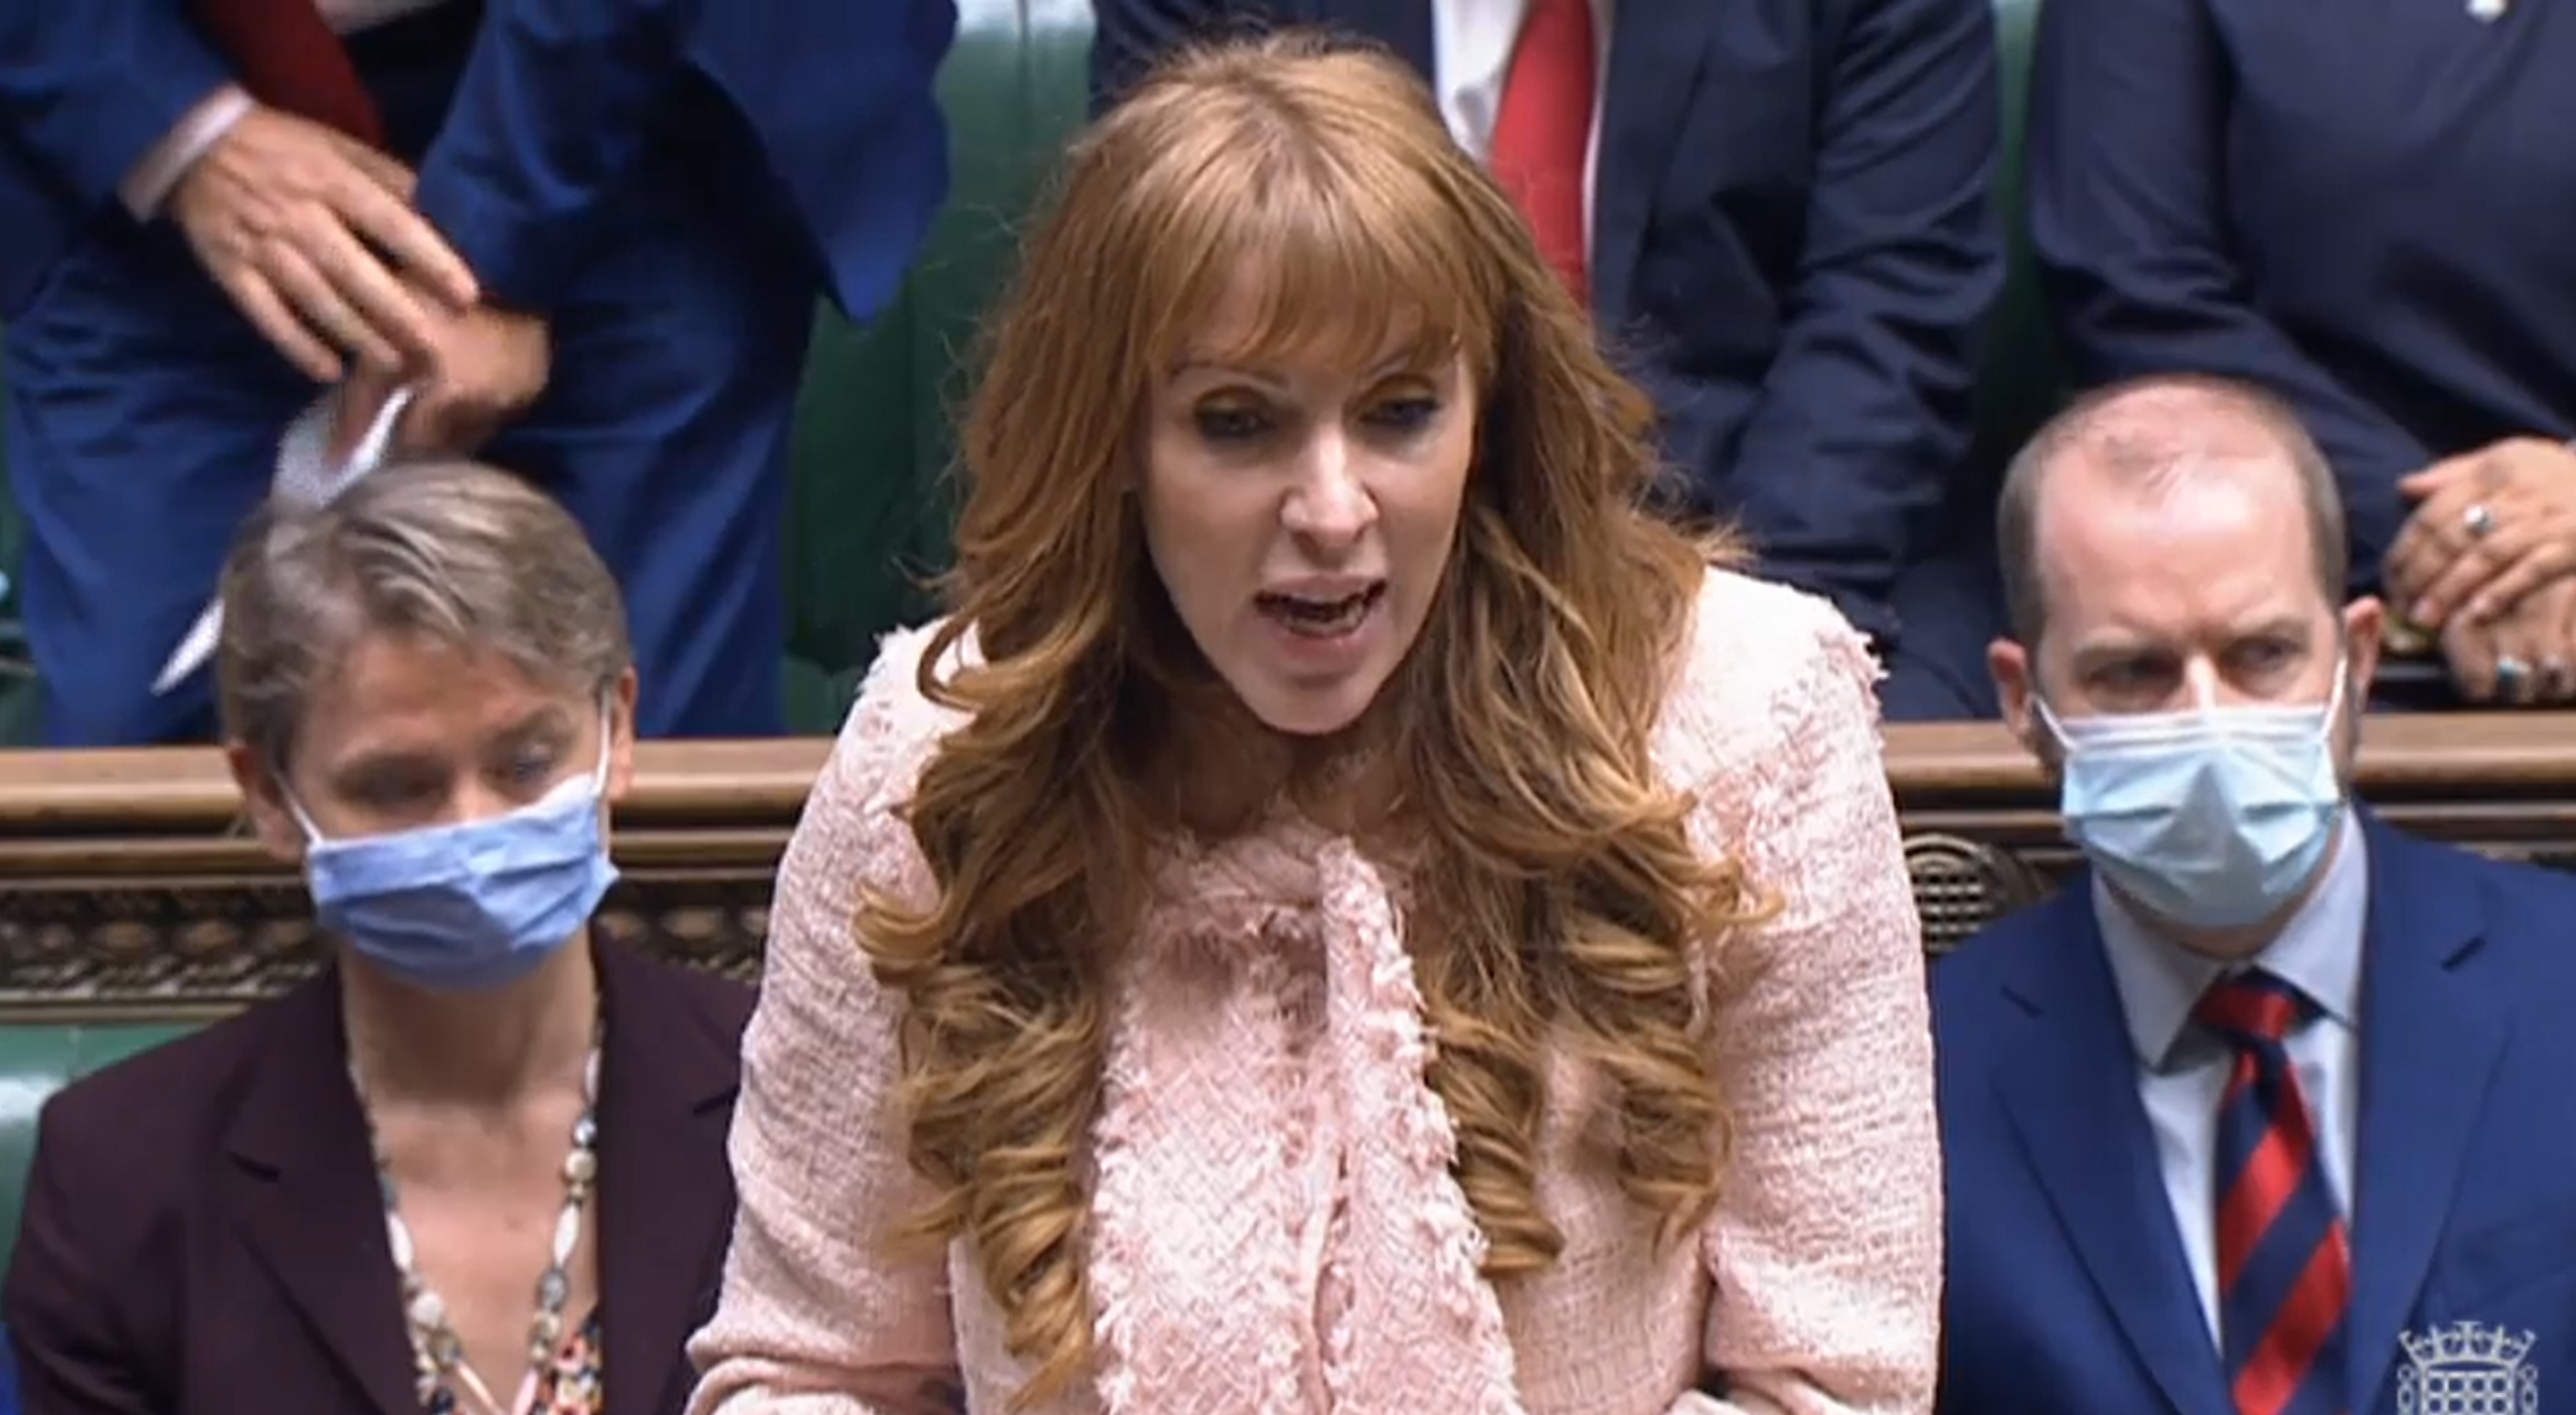 Labour deputy leader Angela Rayner in the House of Commons, Westminster, on Tuesday January 11, 2022 asking an urgent question over the lockdown-busting Downing Street drinks party allegedly attended by Boris Johnson and his wife Carrie. Police are in contact with the Cabinet Office over claims that Martin Reynolds, a senior aide to the Prime Minister, organised a "bring your own booze" party in the garden behind No 10 during England's first lockdown in May 2020. 